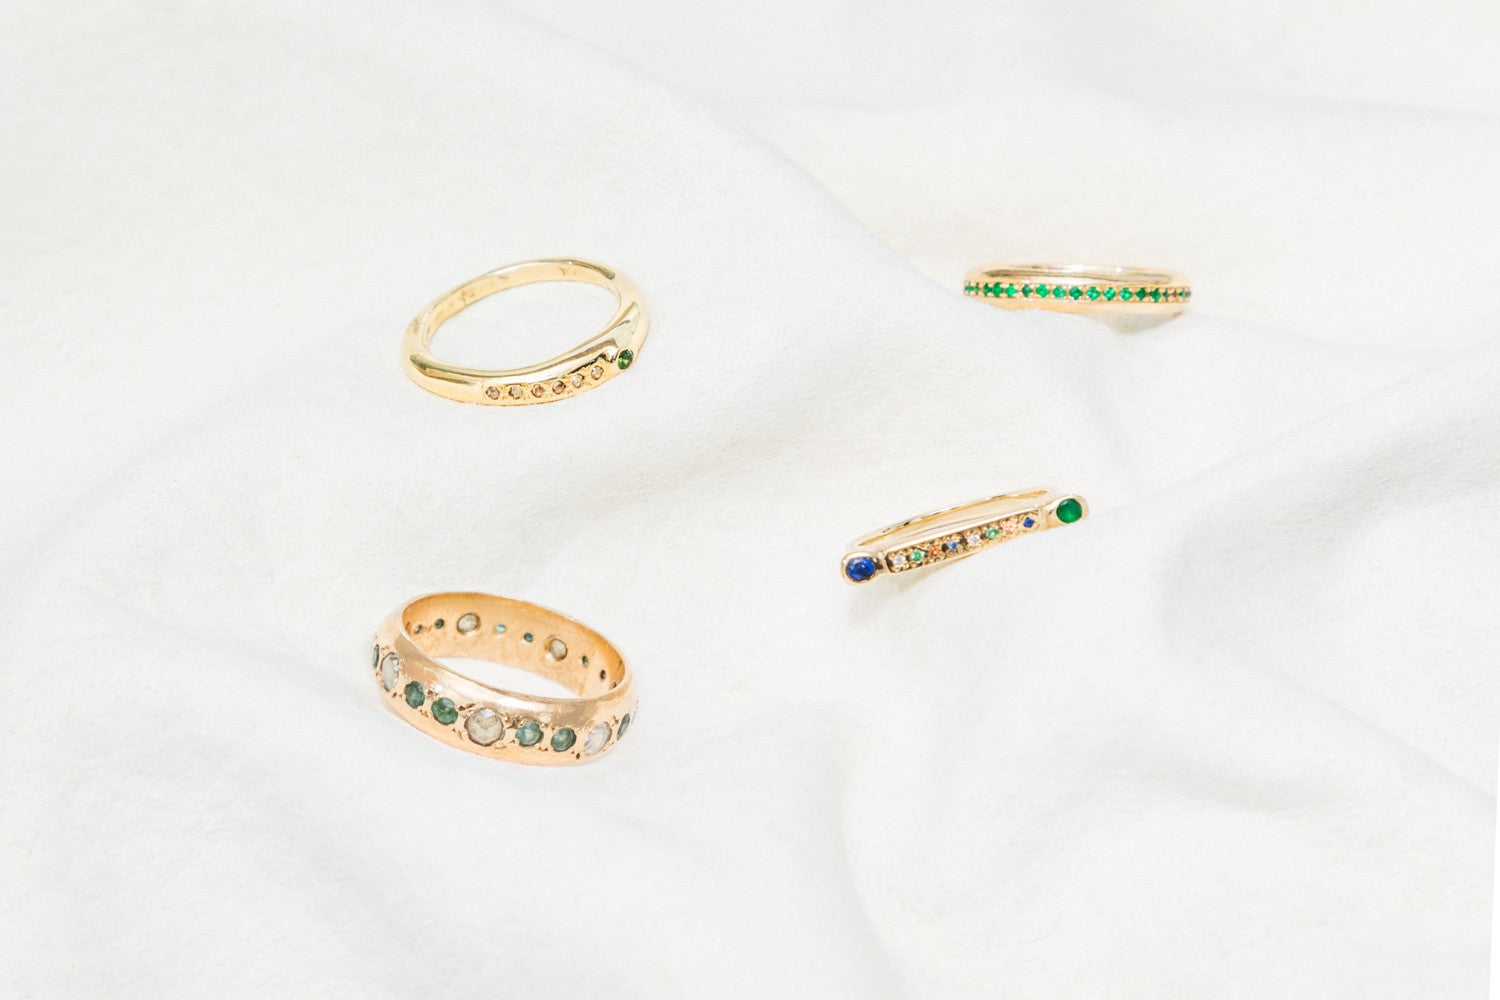 The Emerald Engagement Rings Non-Traditional Brides Will Love